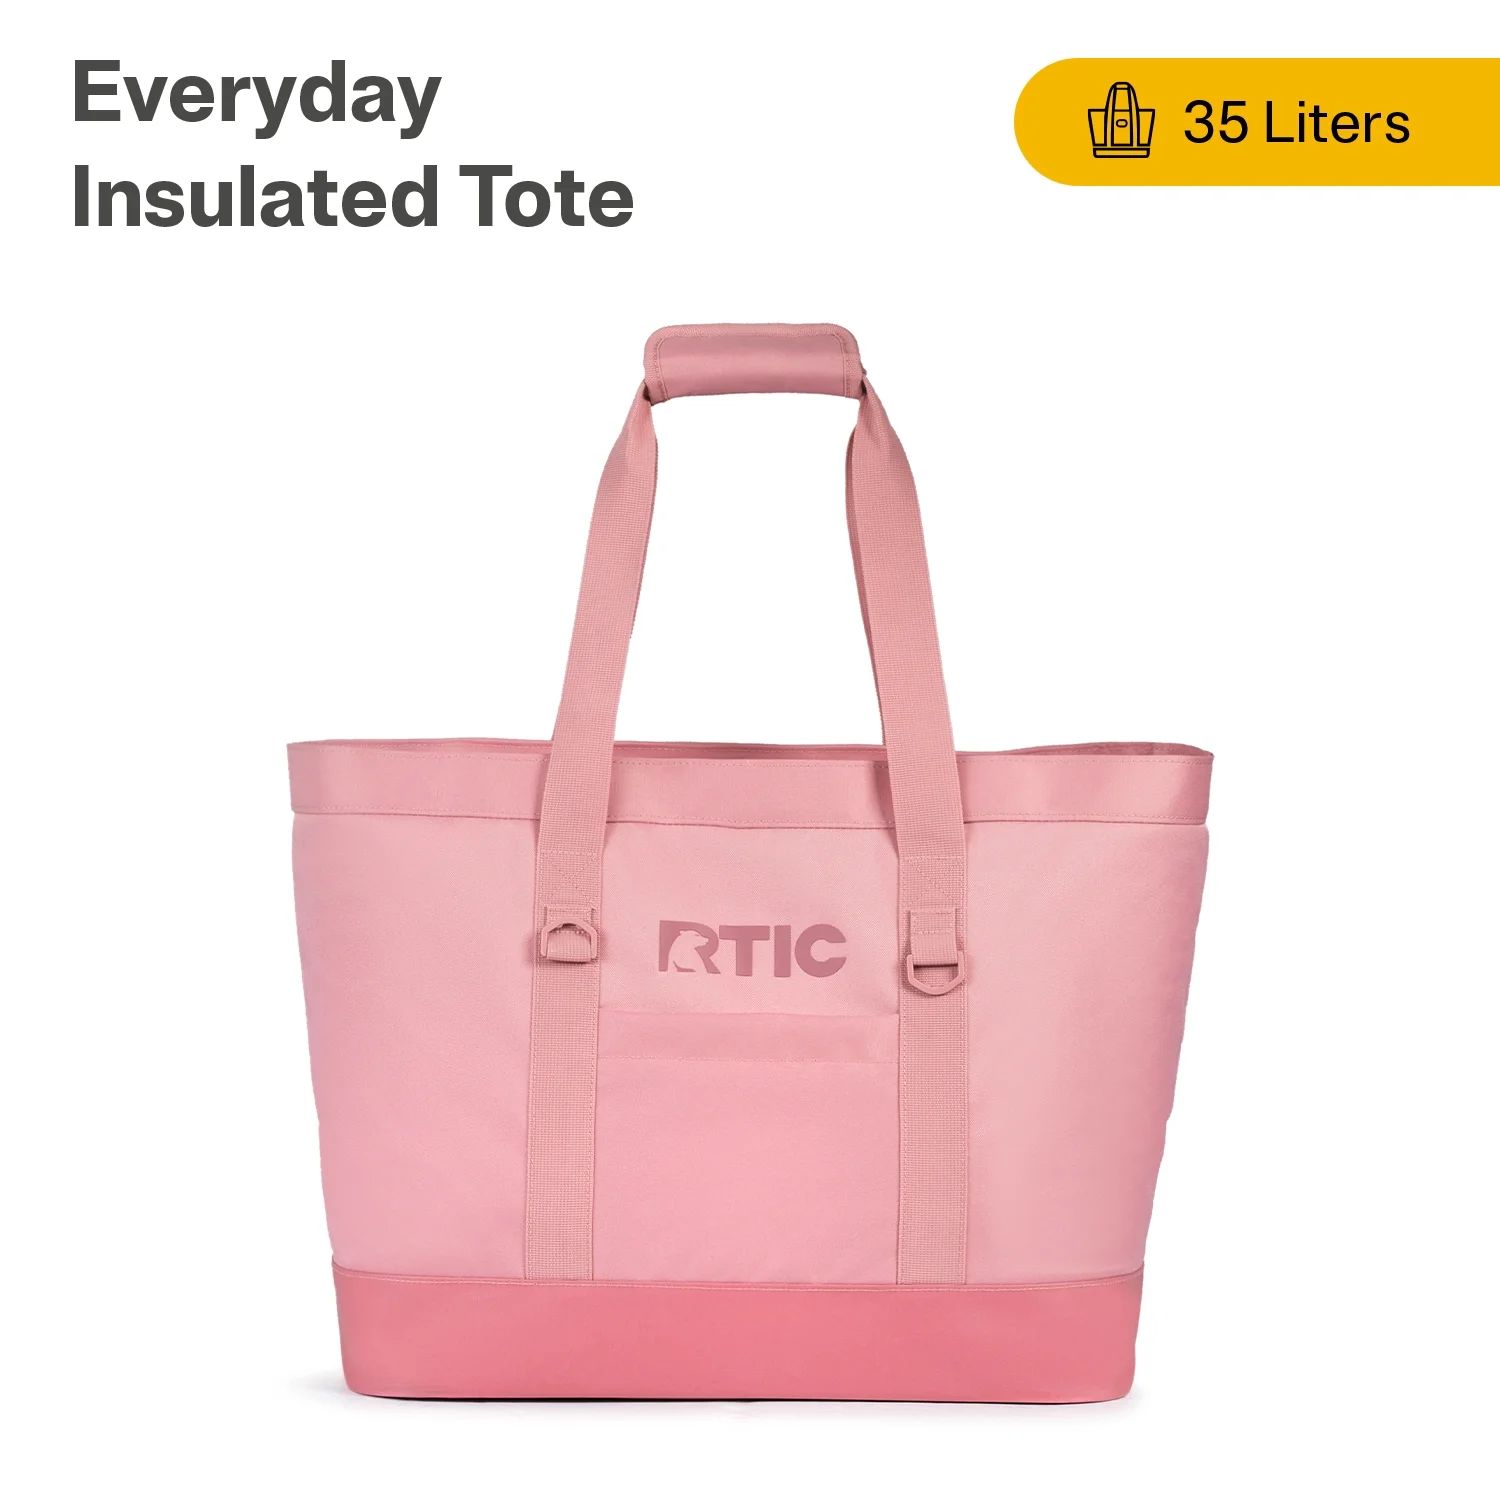 RTIC Everyday Insulated Tote Bag, 35 ltr Insulated Cooler Bag, Leak-Free Interior, Dusty Rose | Walmart (US)